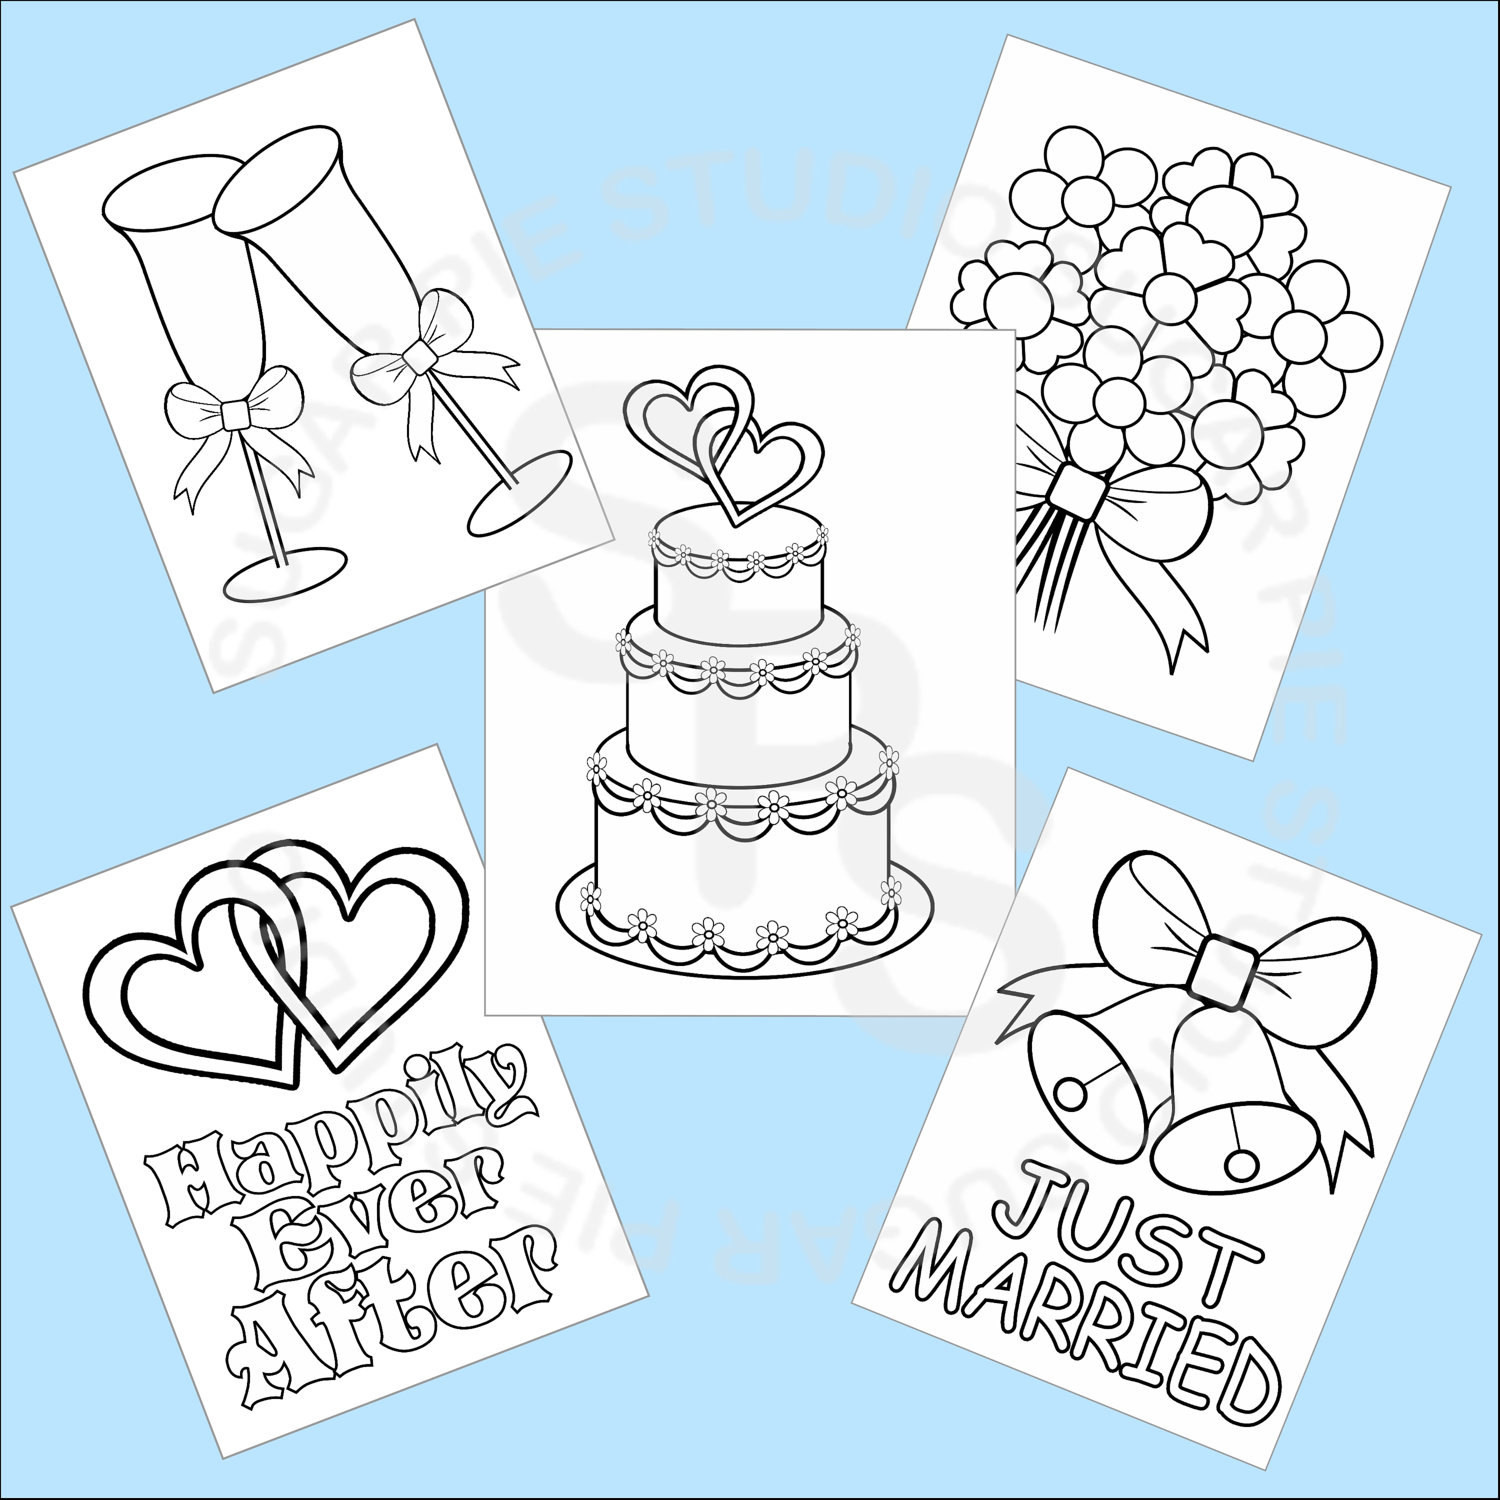 Printable Wedding Coloring Pages
 5 Printable Wedding Favor Kids coloring pages PDF or JPEG file